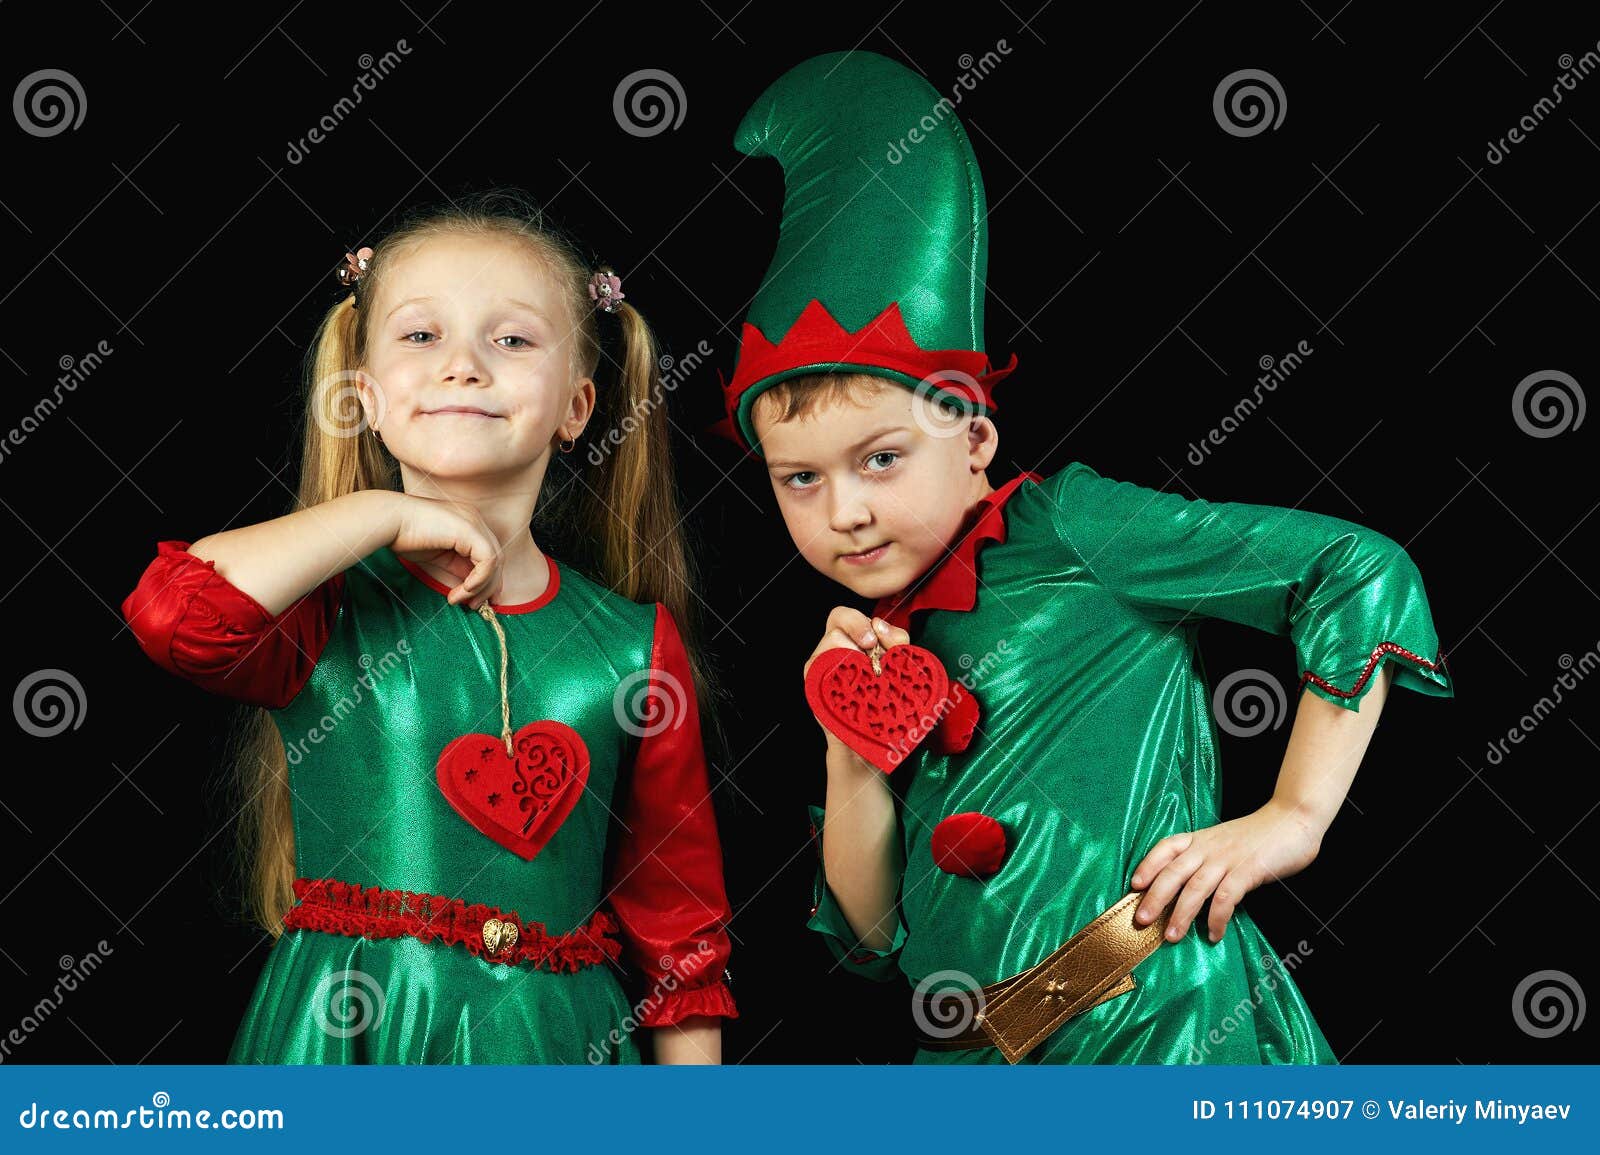 Funny Kids Green Fancy Dress on a Dark Background Stock Image - Image of  color, cheerful: 111074907